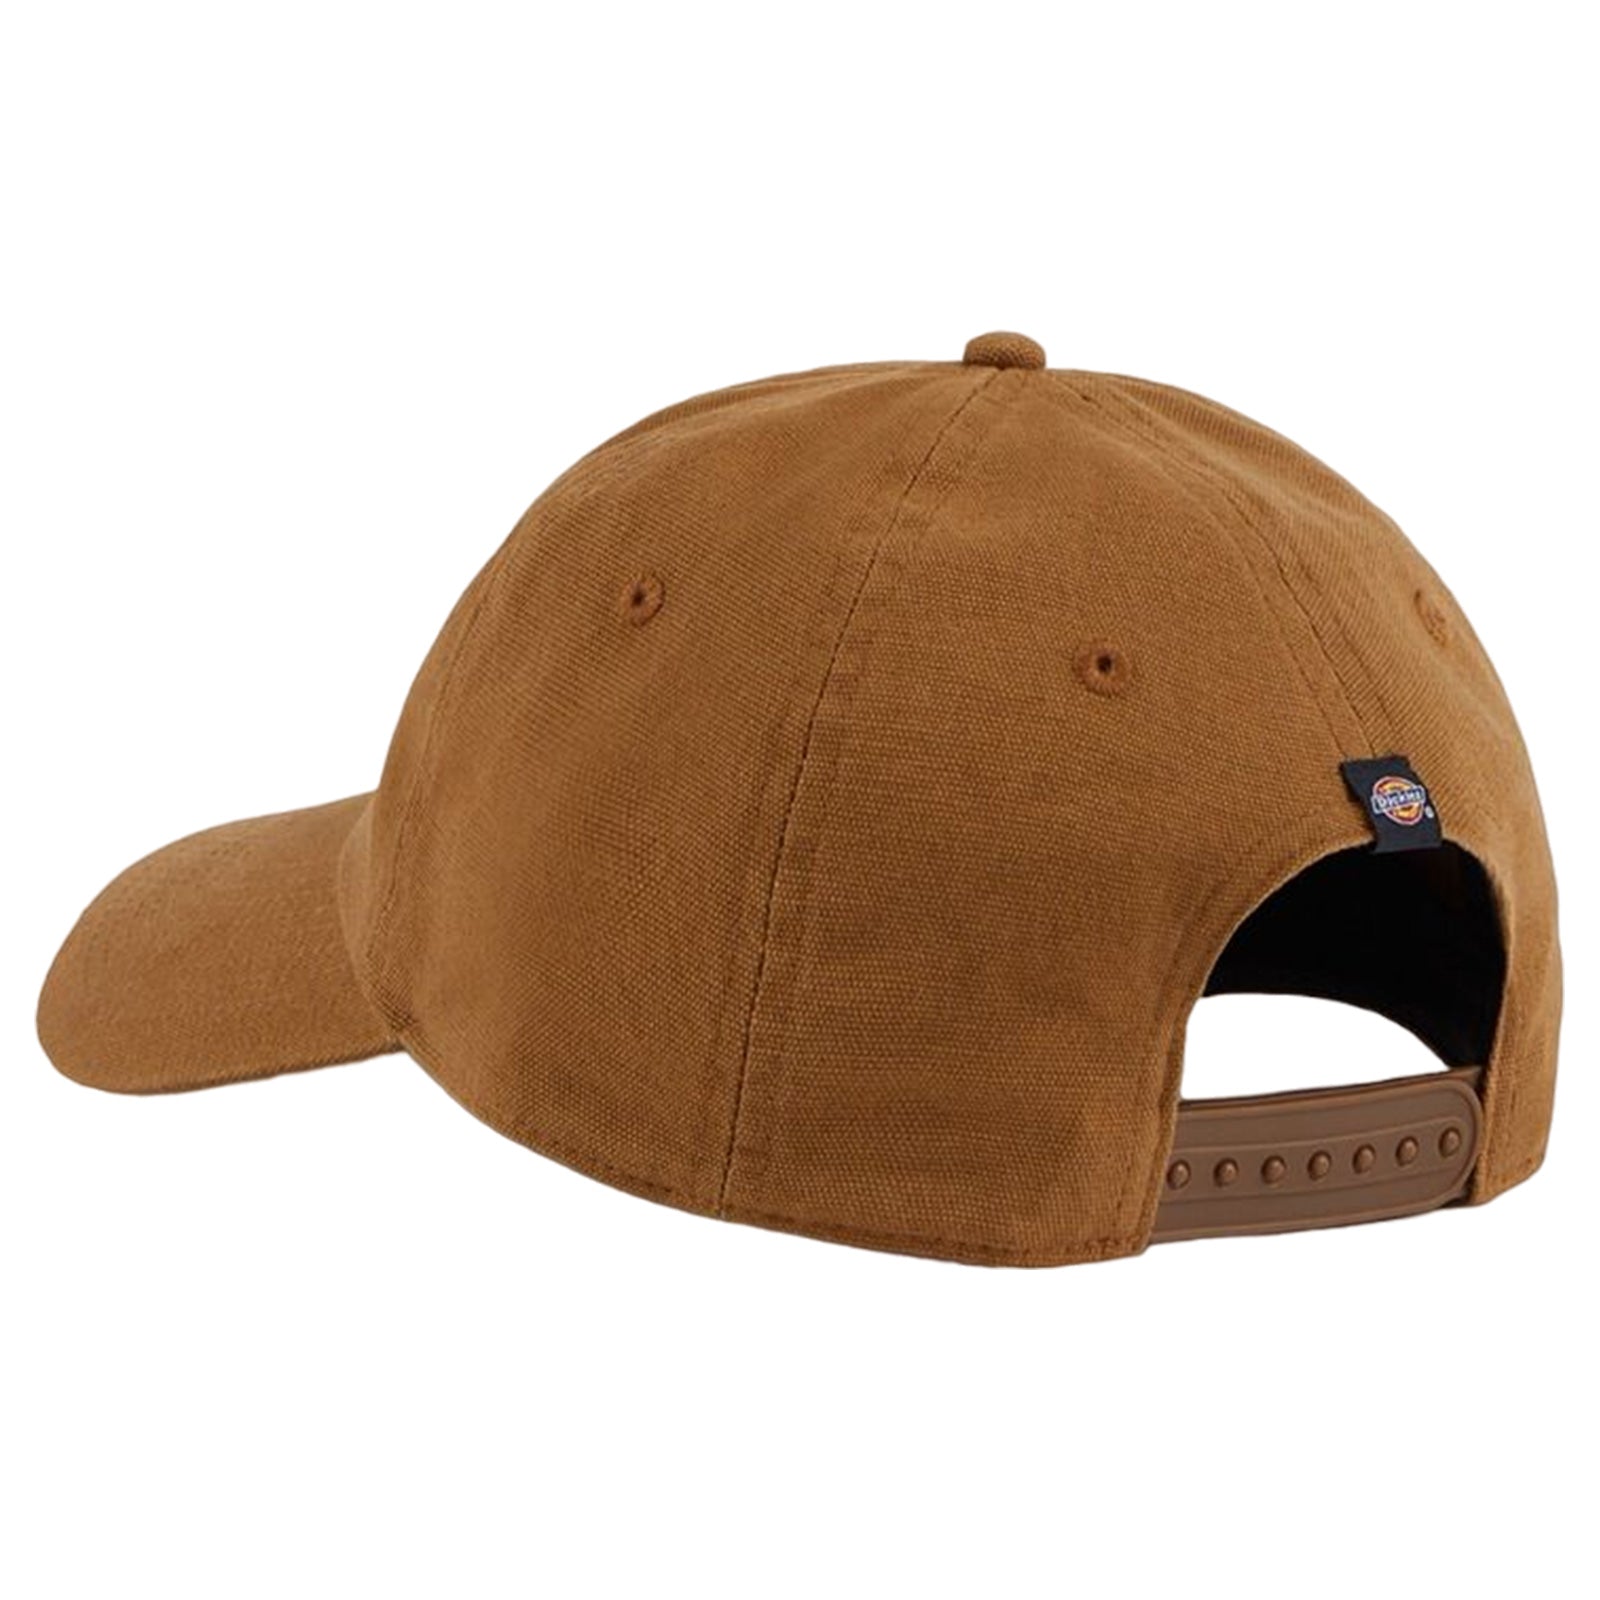 Dickies Unisex Washed Canvas Cap